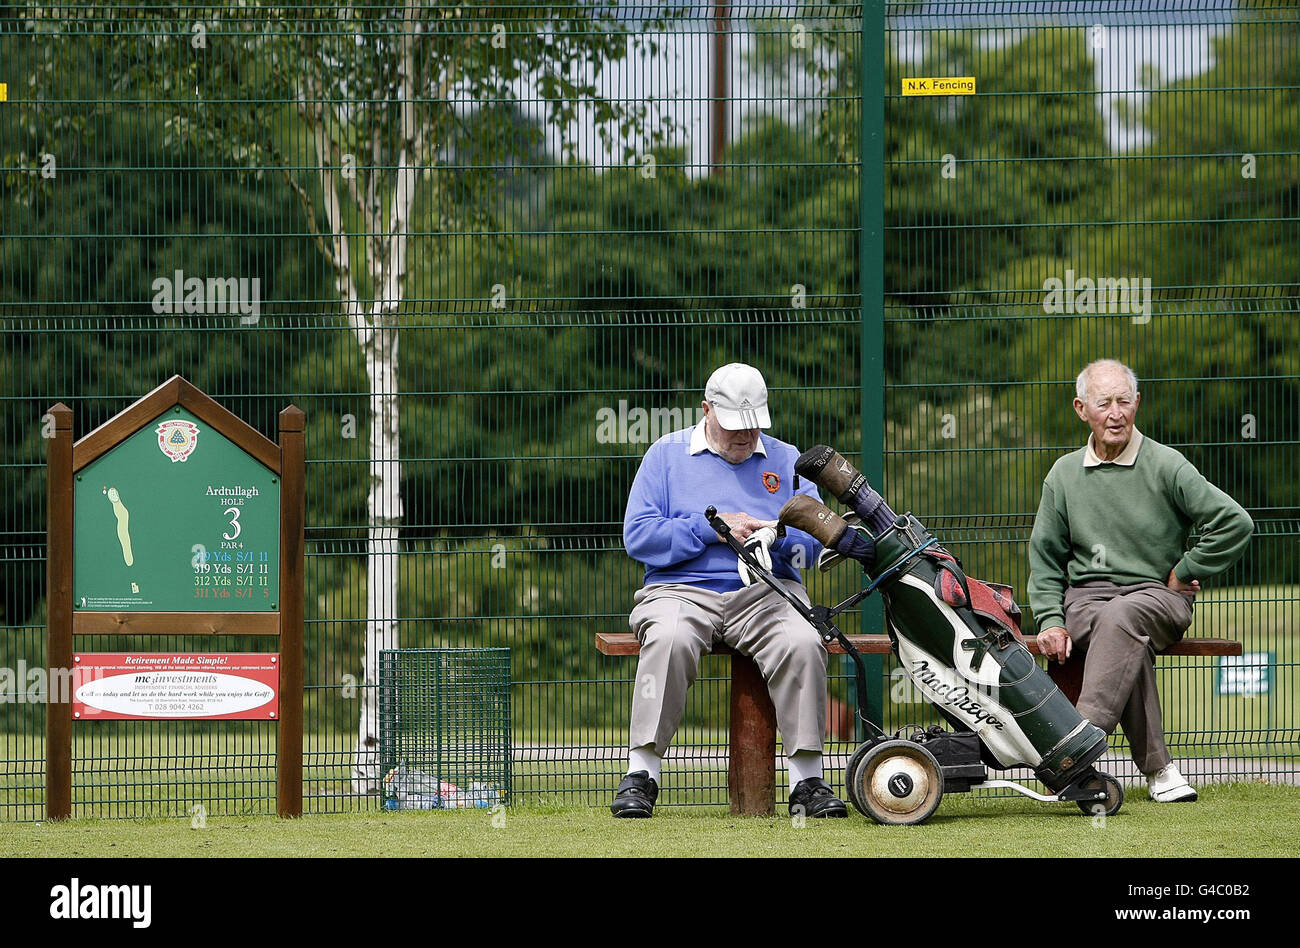 Members of Holywood Golf Club Holywood Golf Club in Co. Down, Northern  Ireland, the home club of US Open winner Rory McIlroy, rest at the 3rd tee  during their round of golf